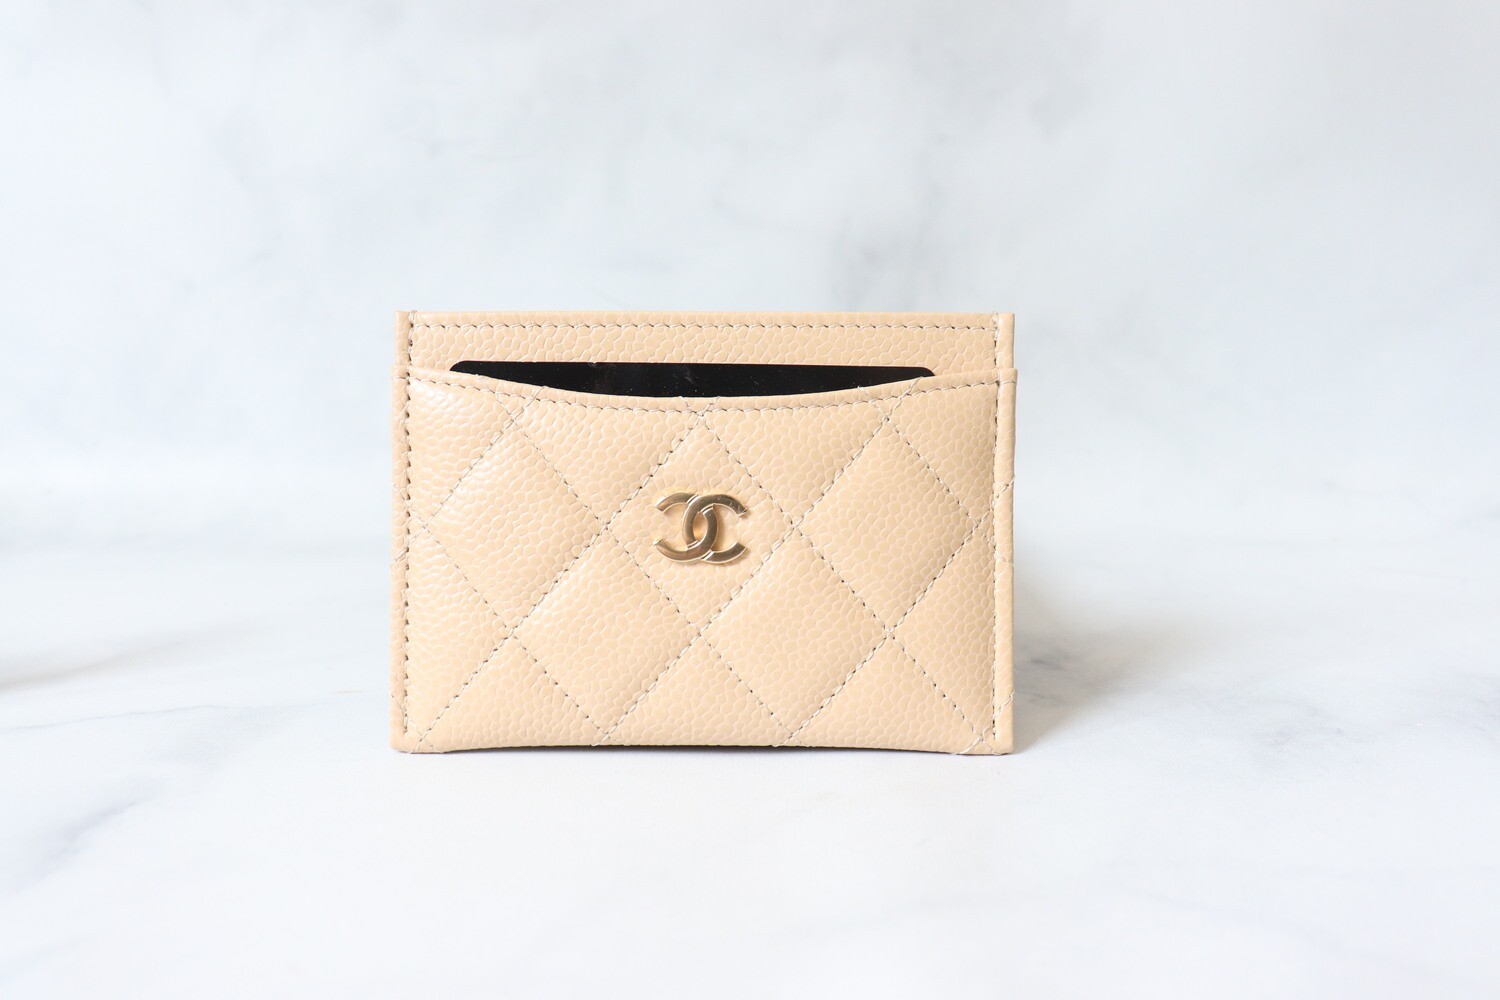 Chanel SLG Cardholder Beige Caviar Leather, Gold Hardware, New in Box